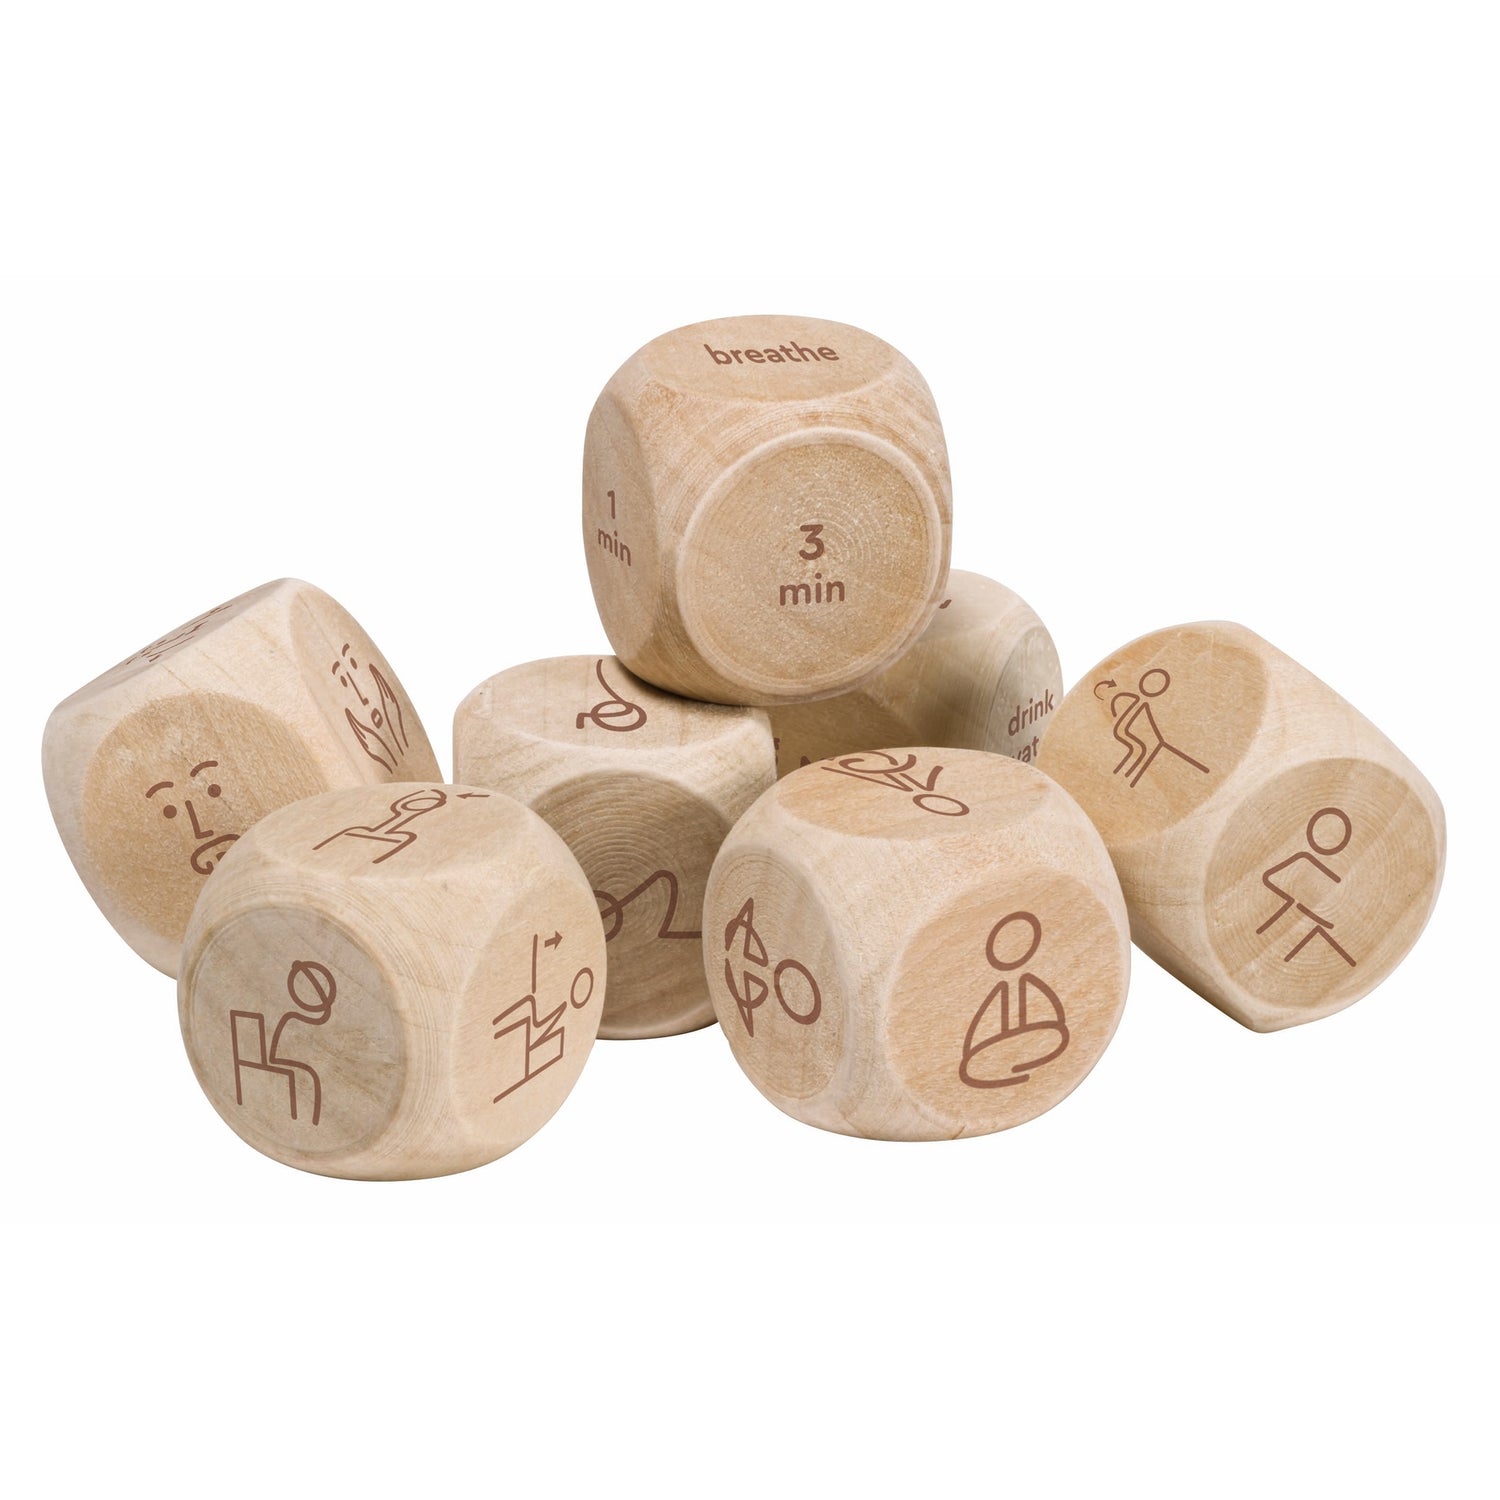 Image of the “Strike A Pose” Yoga Dice, on a white background.